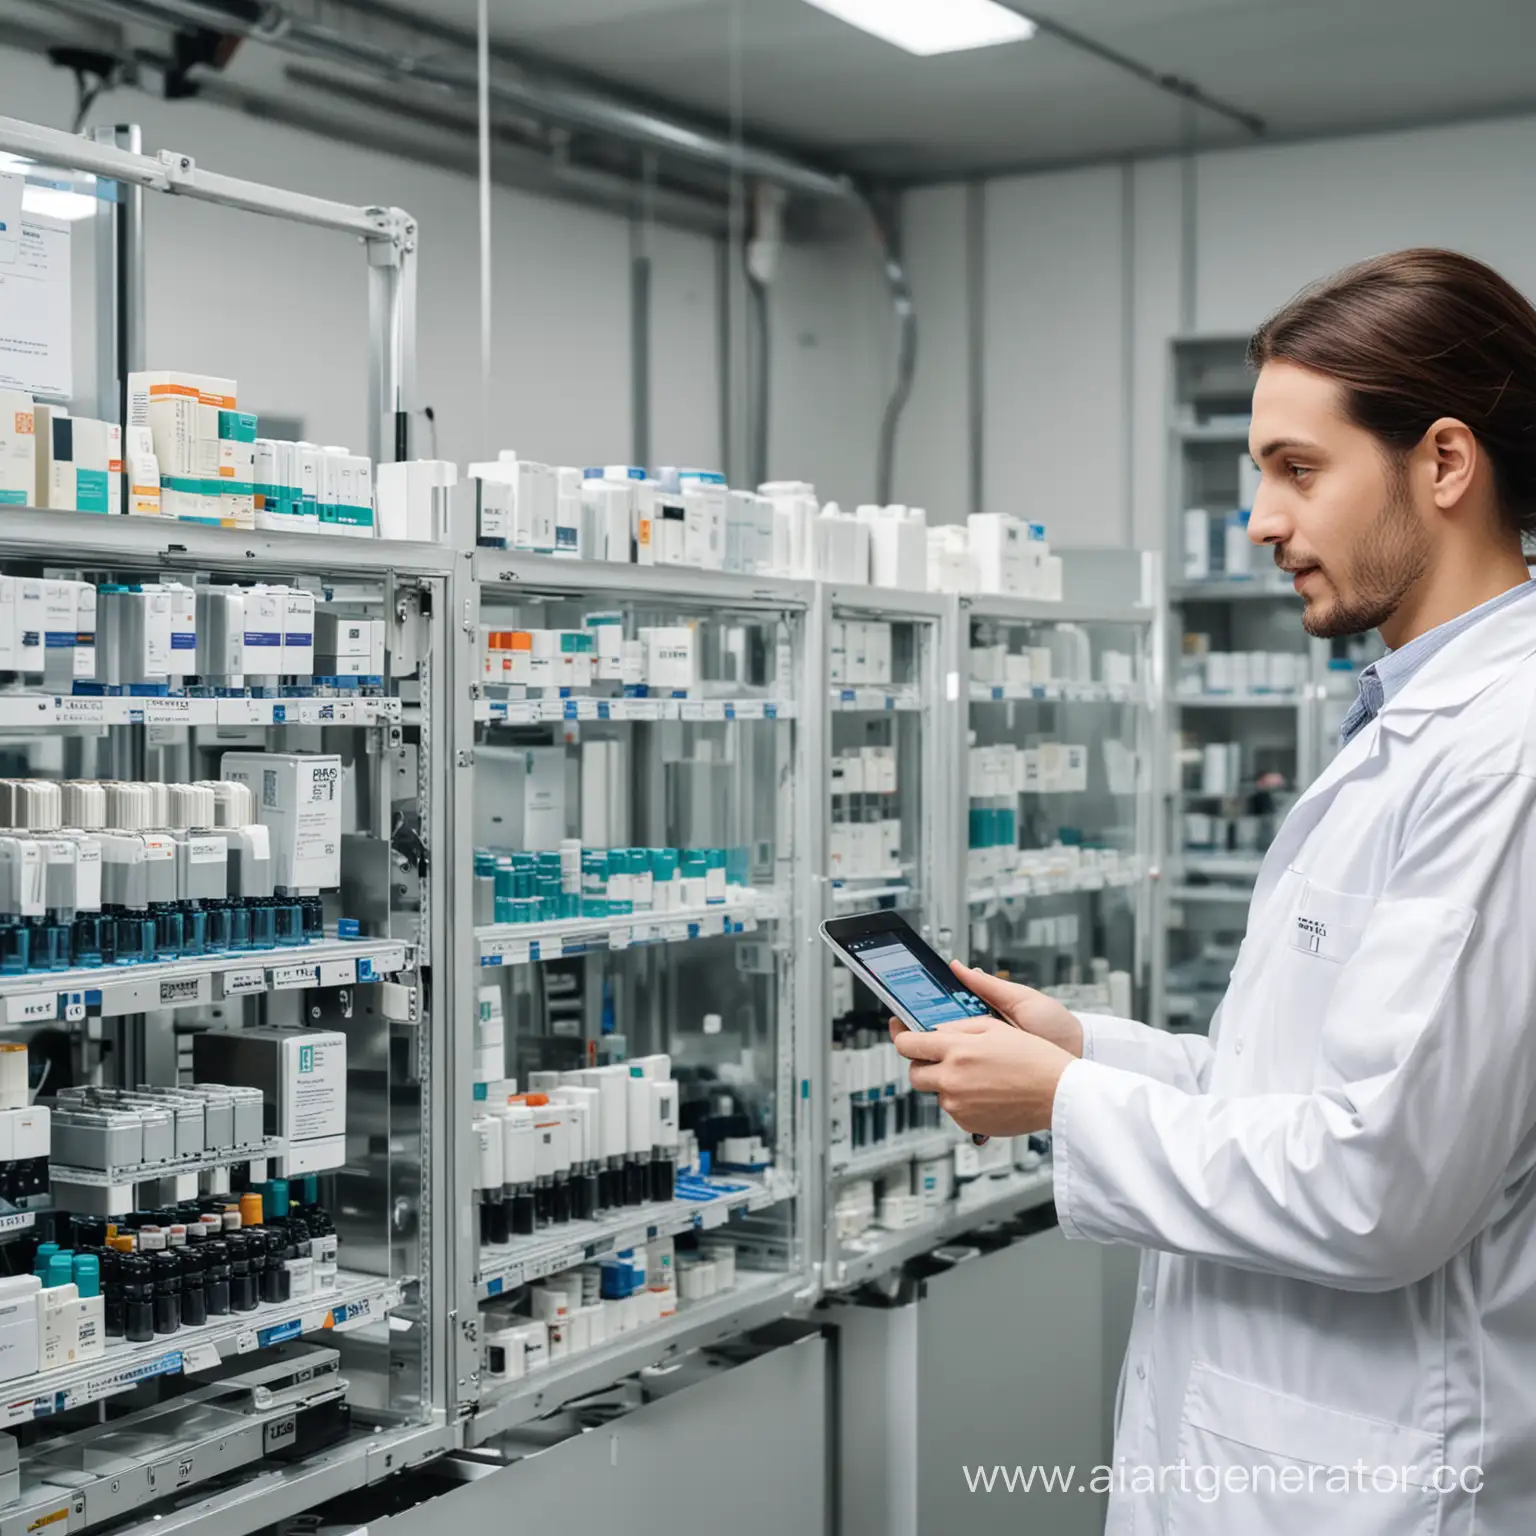 AIPowered-Pharmaceutical-Quality-Management-with-RFID-Sensor-Integration